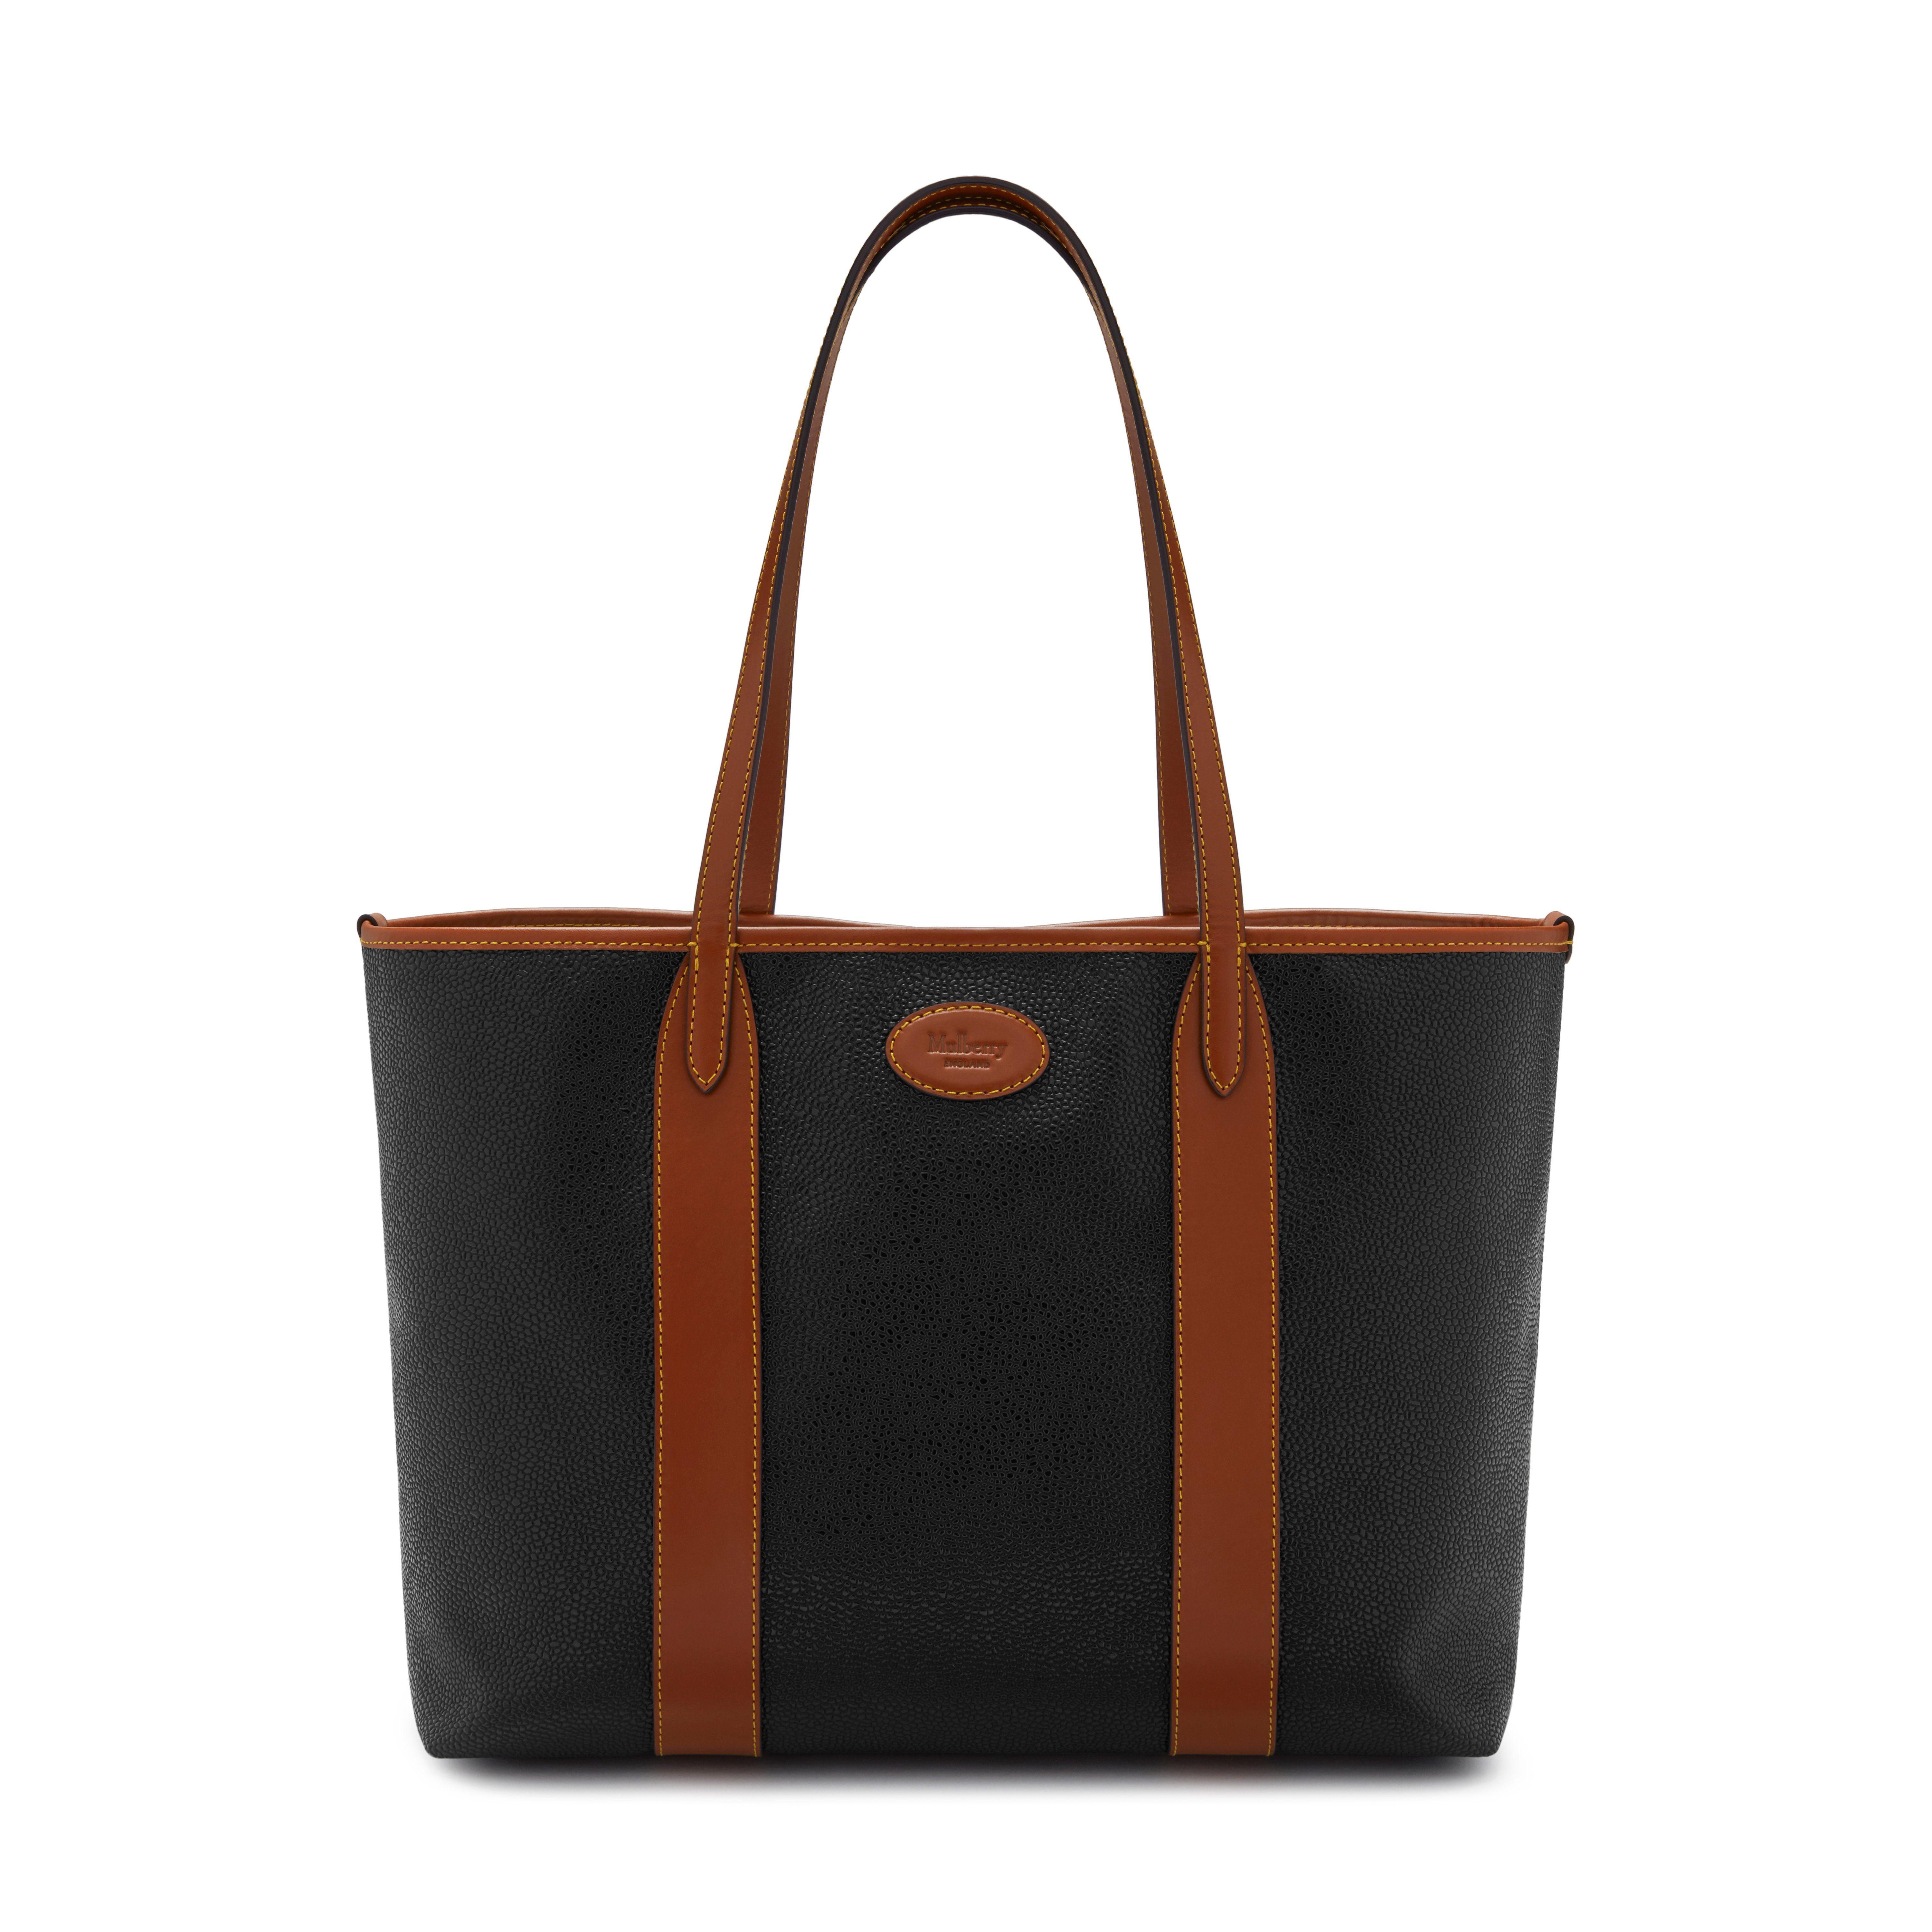 Mulberry Bayswater Tote Bag in Black | Lyst